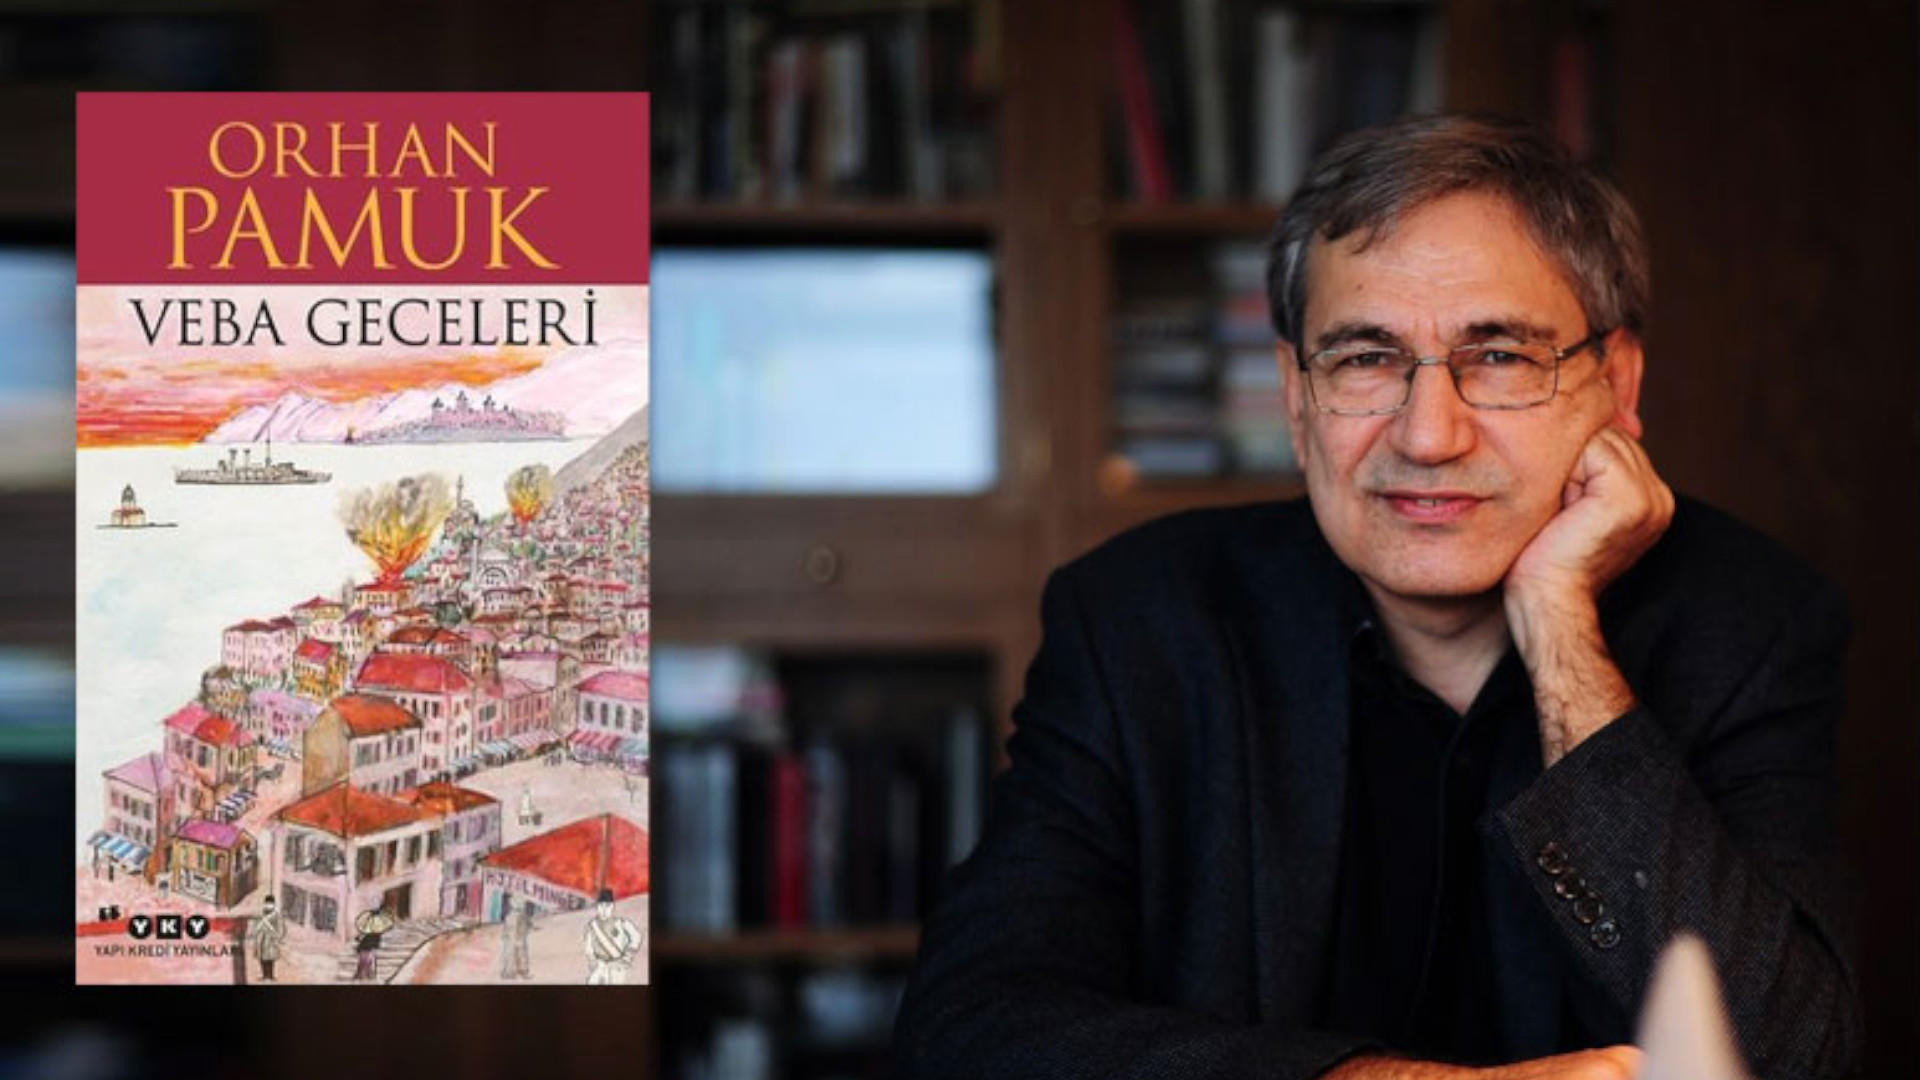 What’s wrong with an Orhan Pamuk TV series?